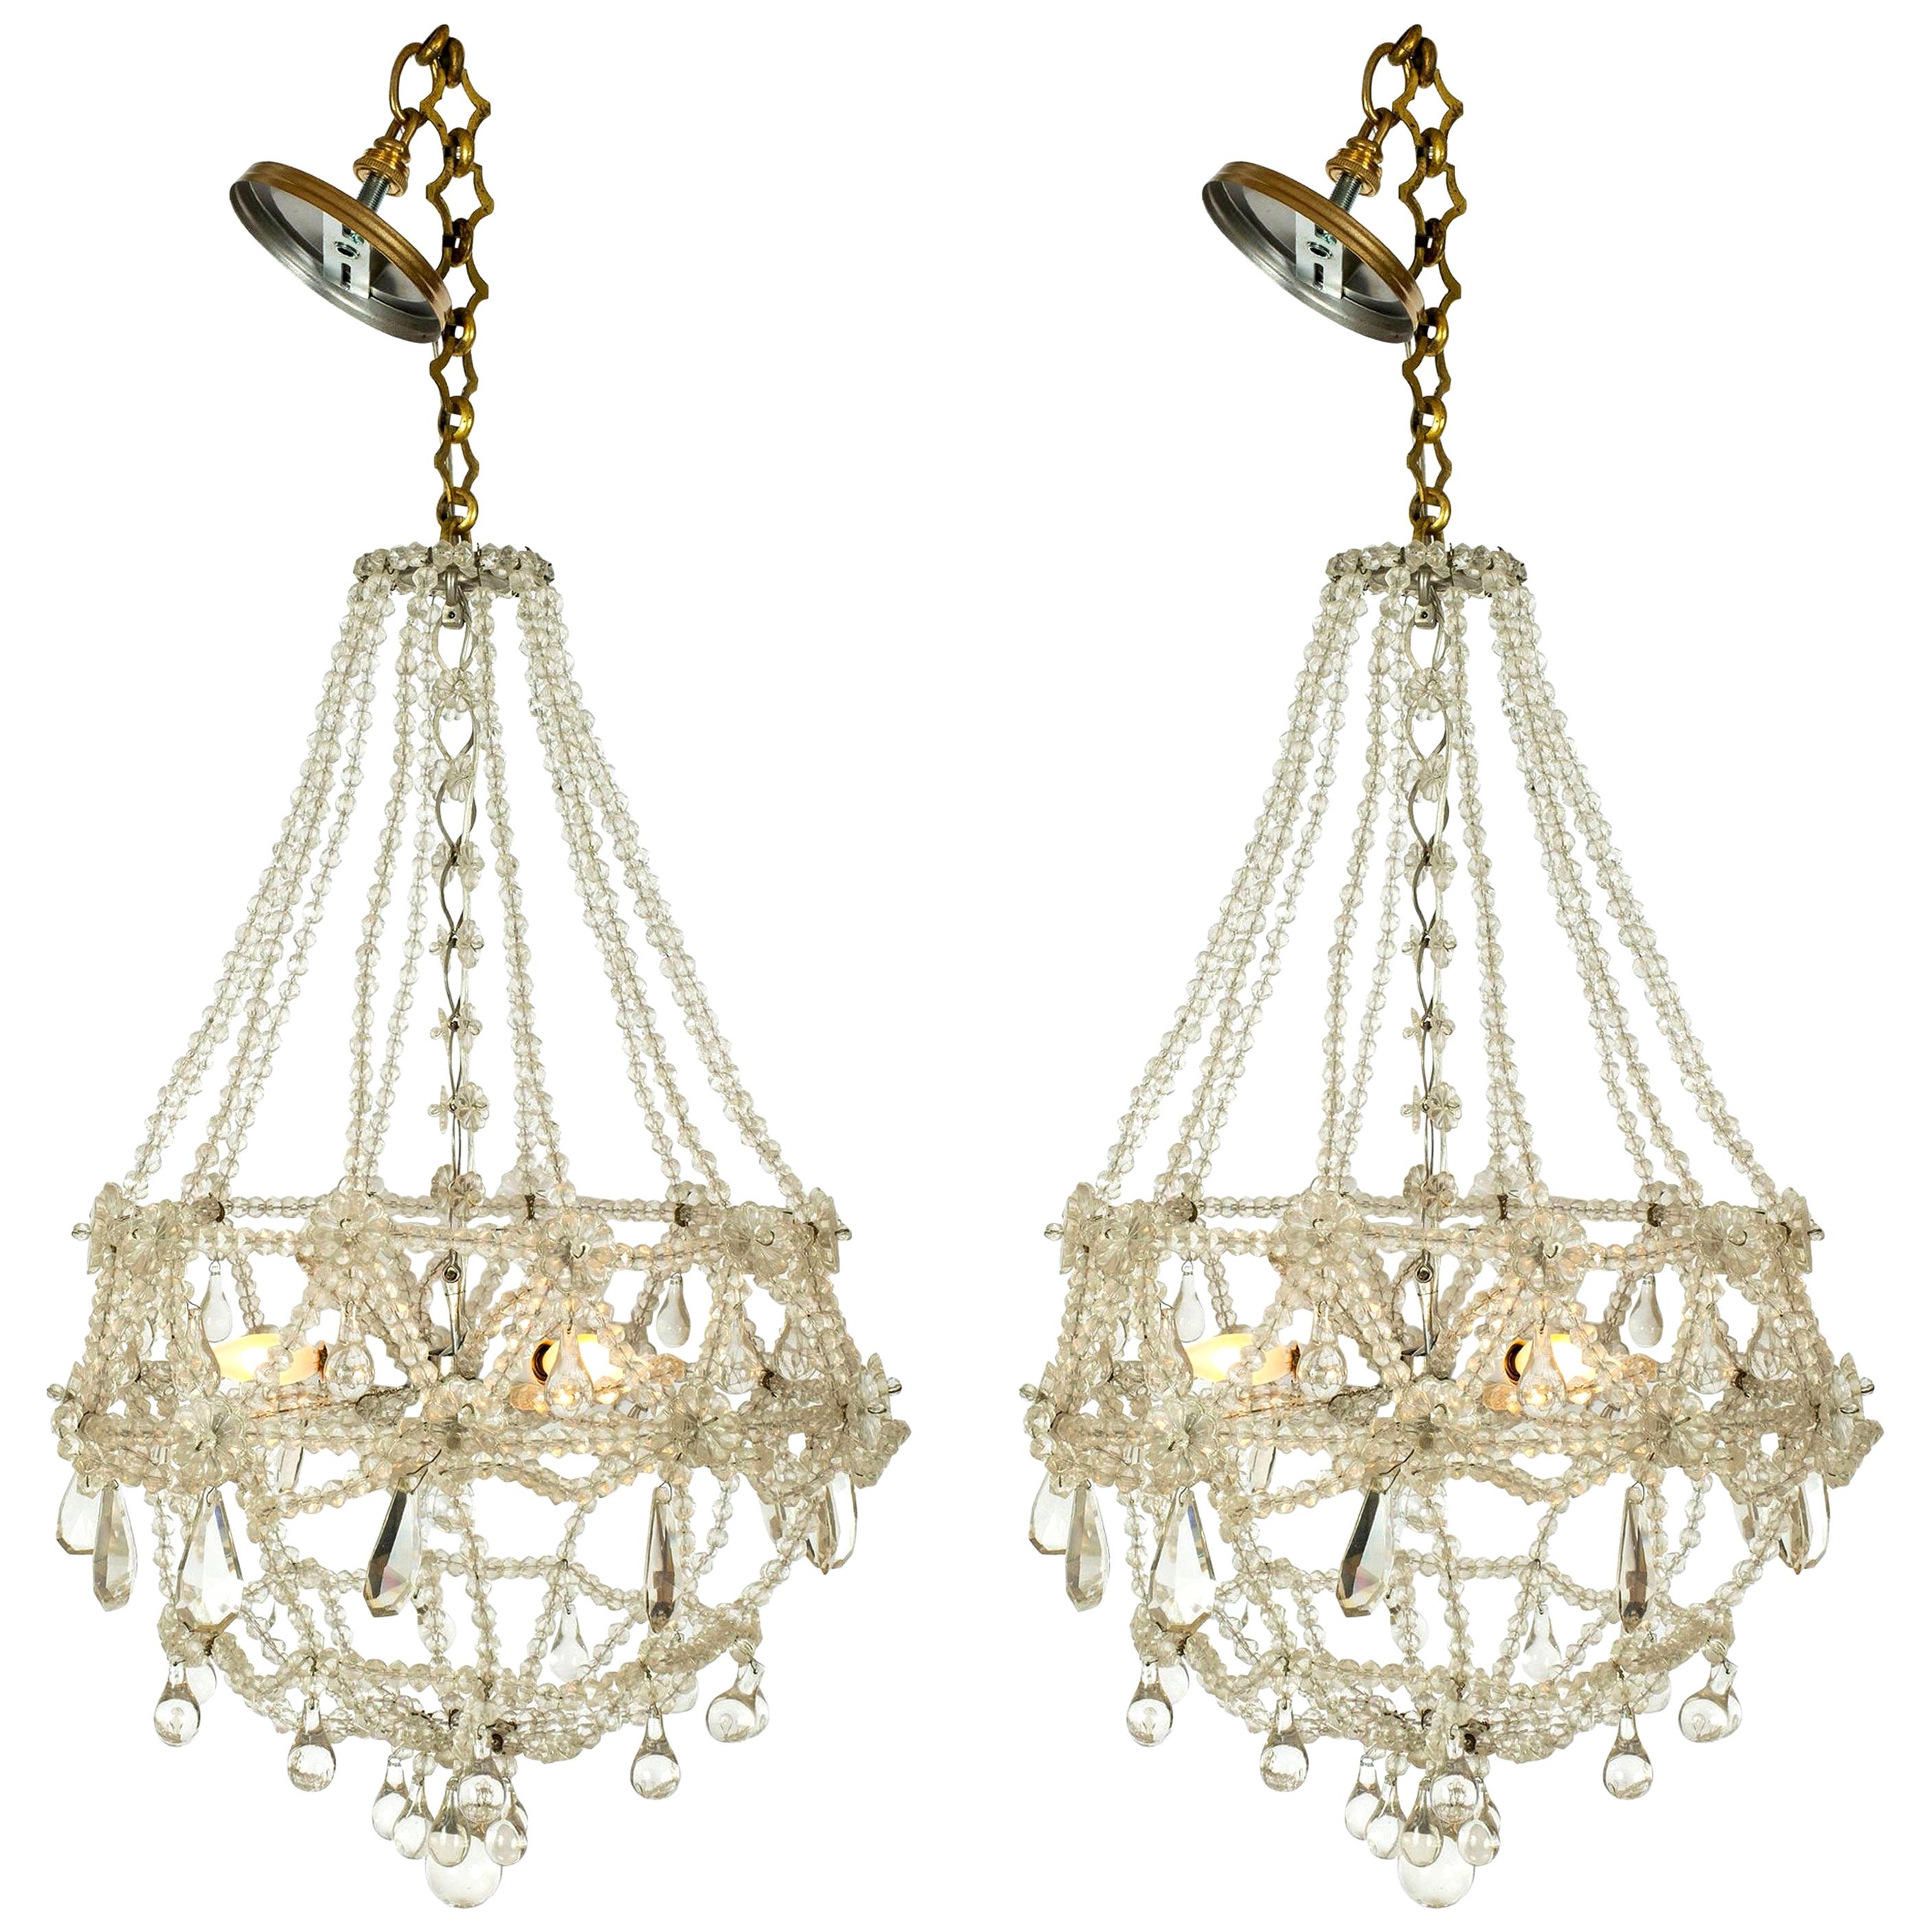 Pair of French Crystal Basket Chandeliers